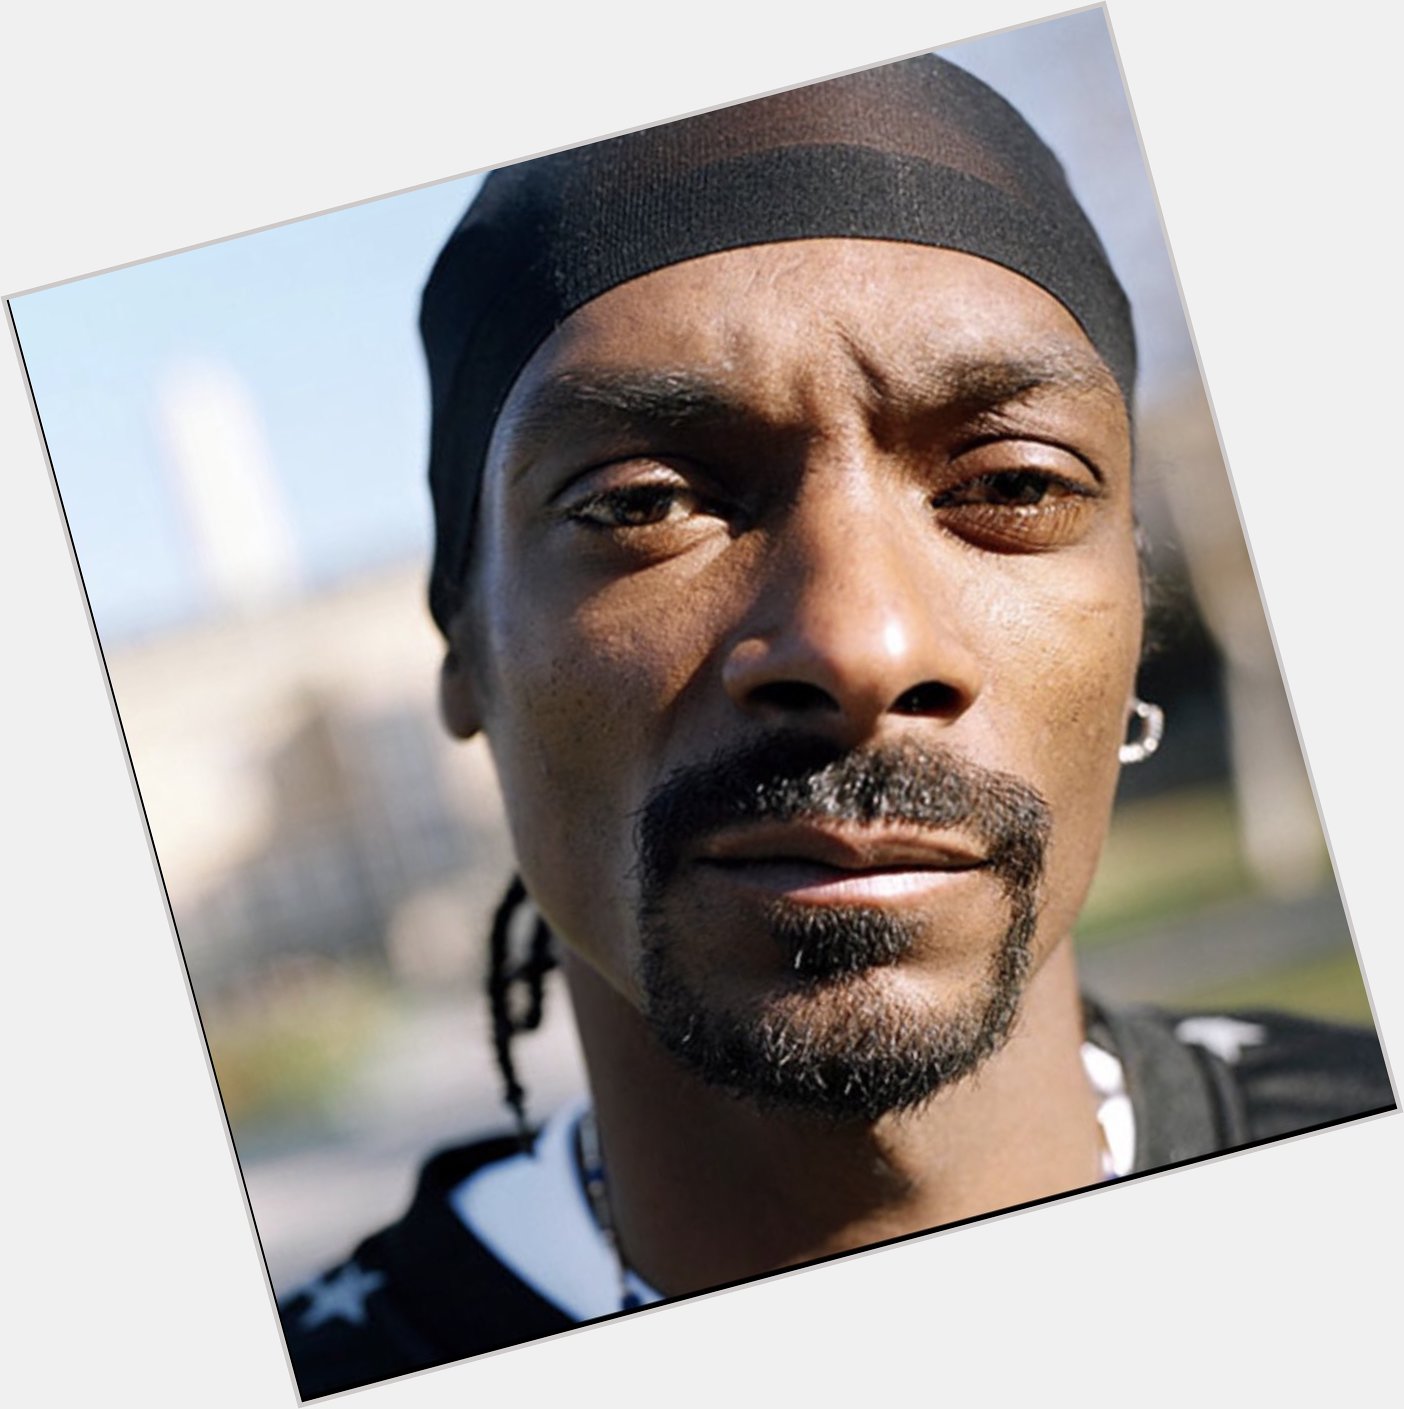 Happy birthday to a legend Snoop Dogg  Name your favorite song from him. 